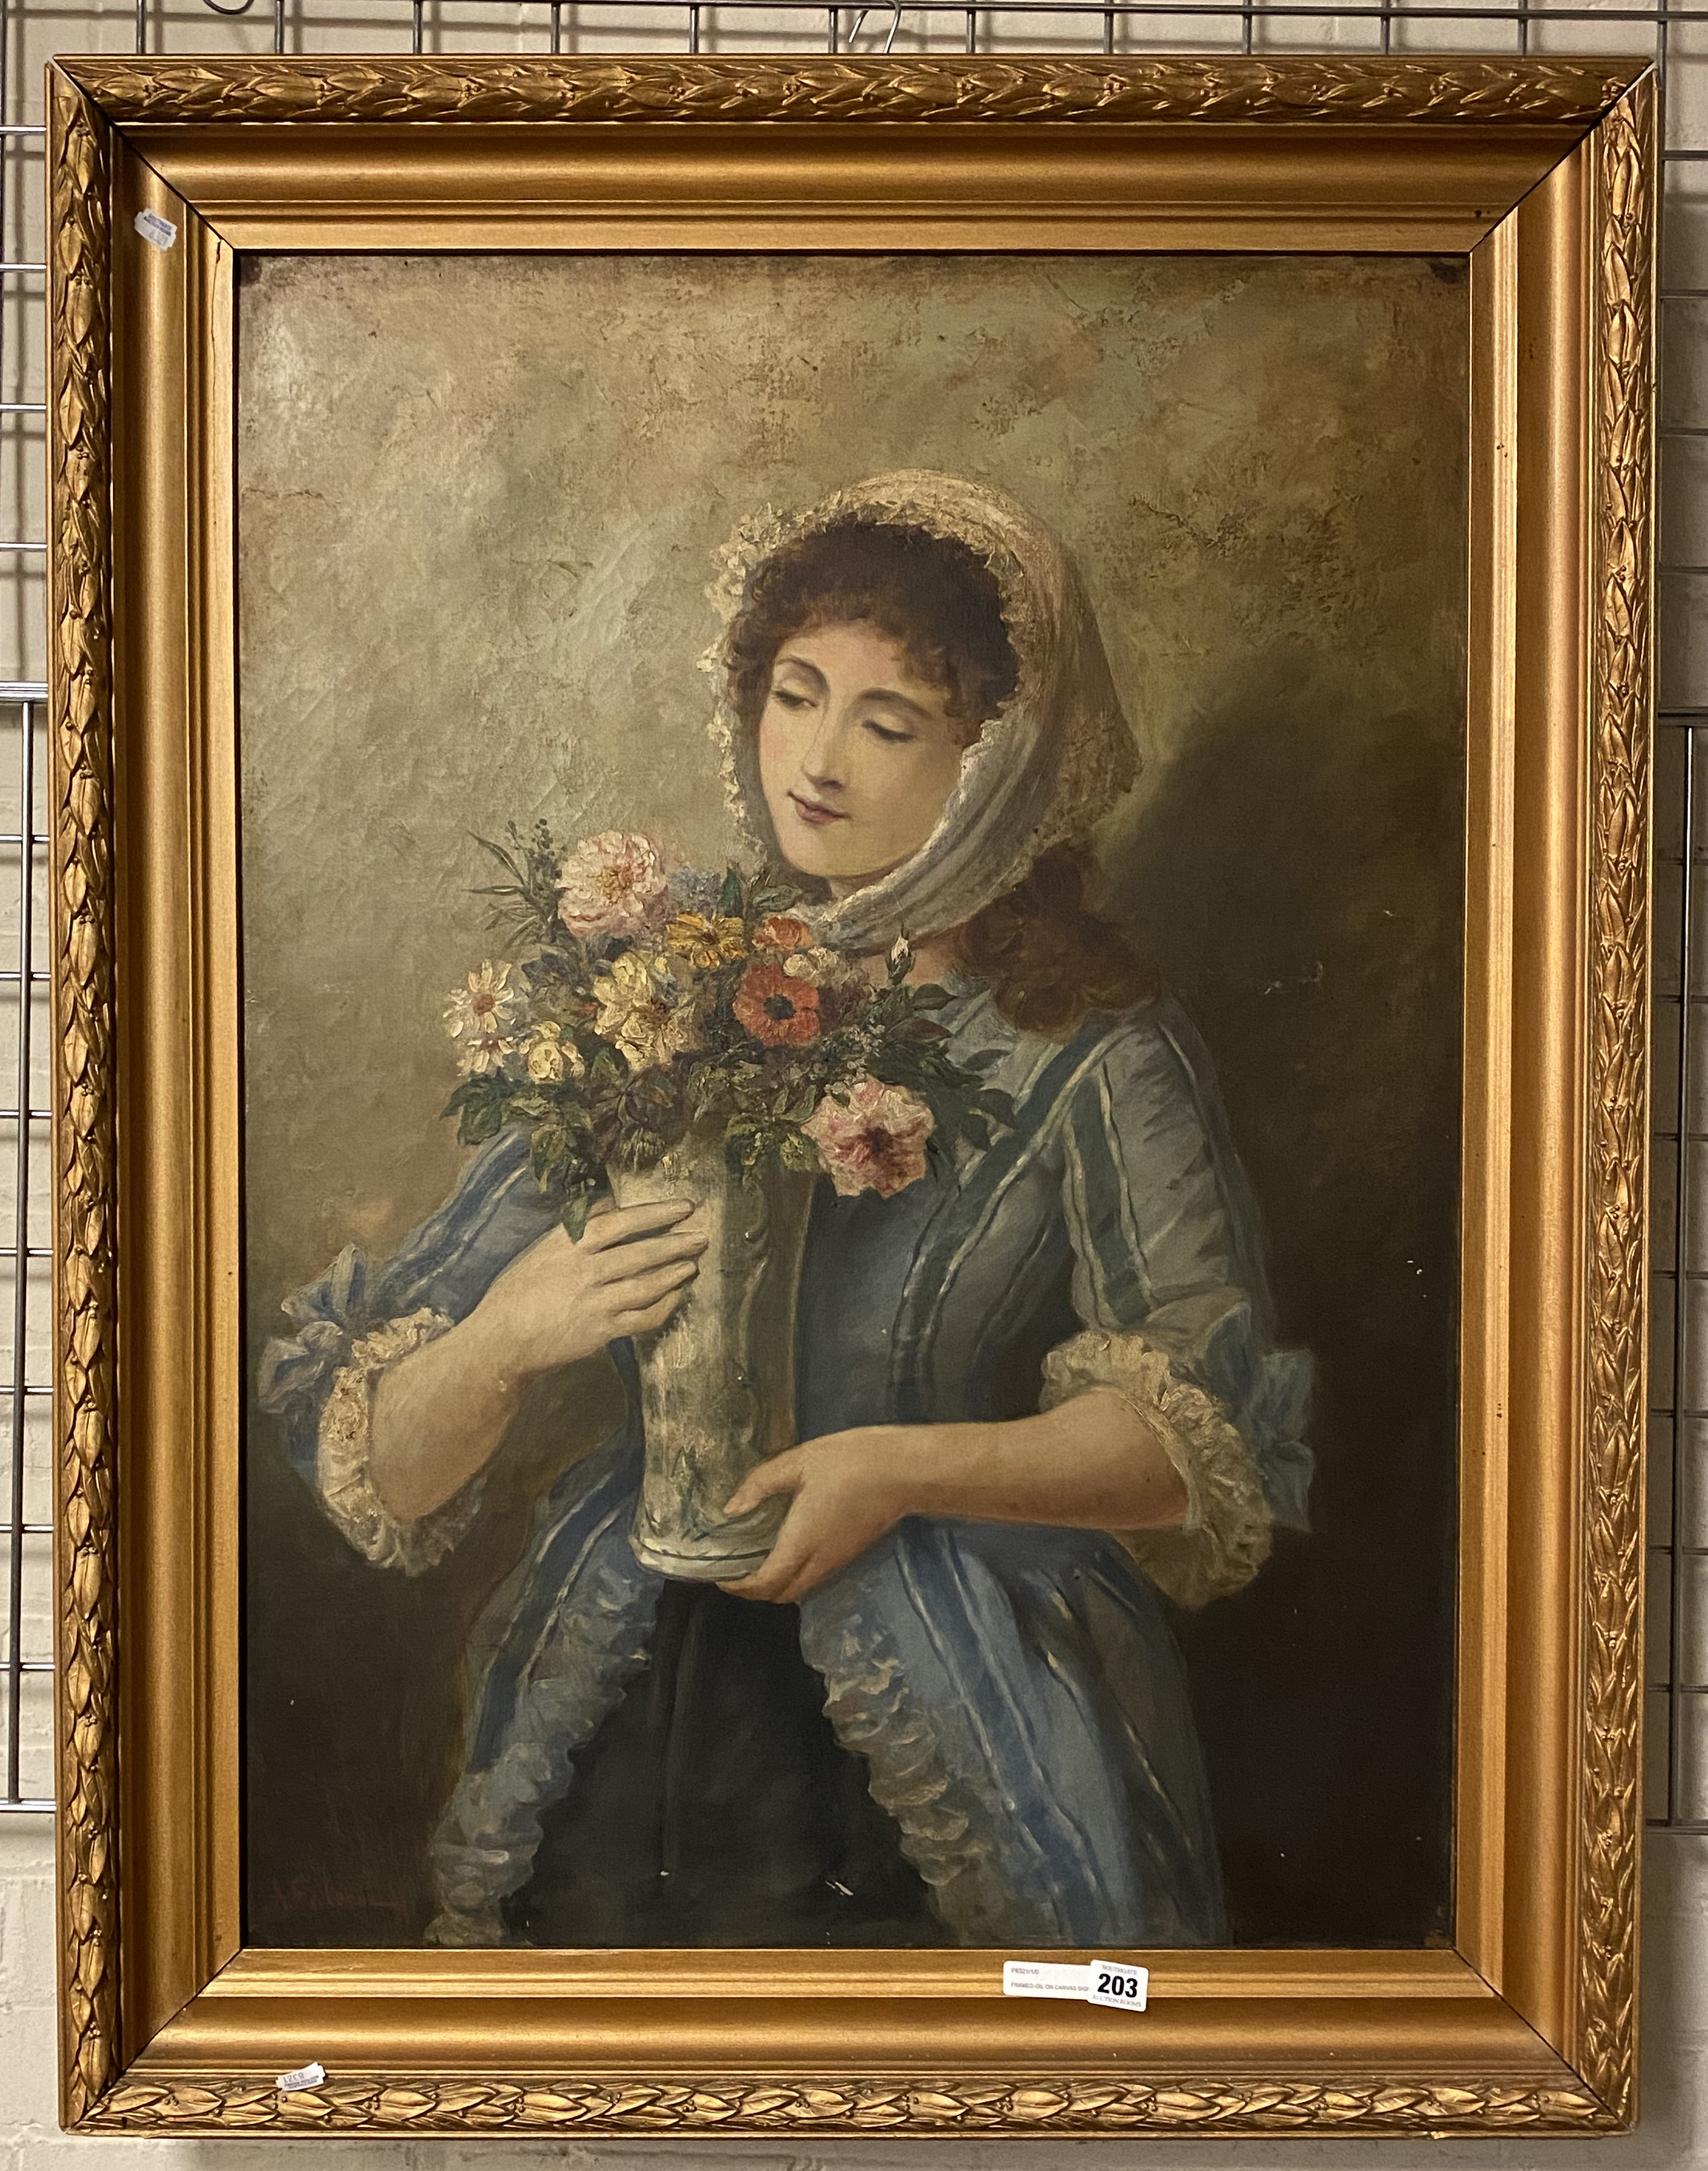 FRAMED OIL ON CANVAS SIGNED A FALERO OF LADT WITH FLOWERS 90CMS (H) X 65CMS (W) INNER FRAME APPROX